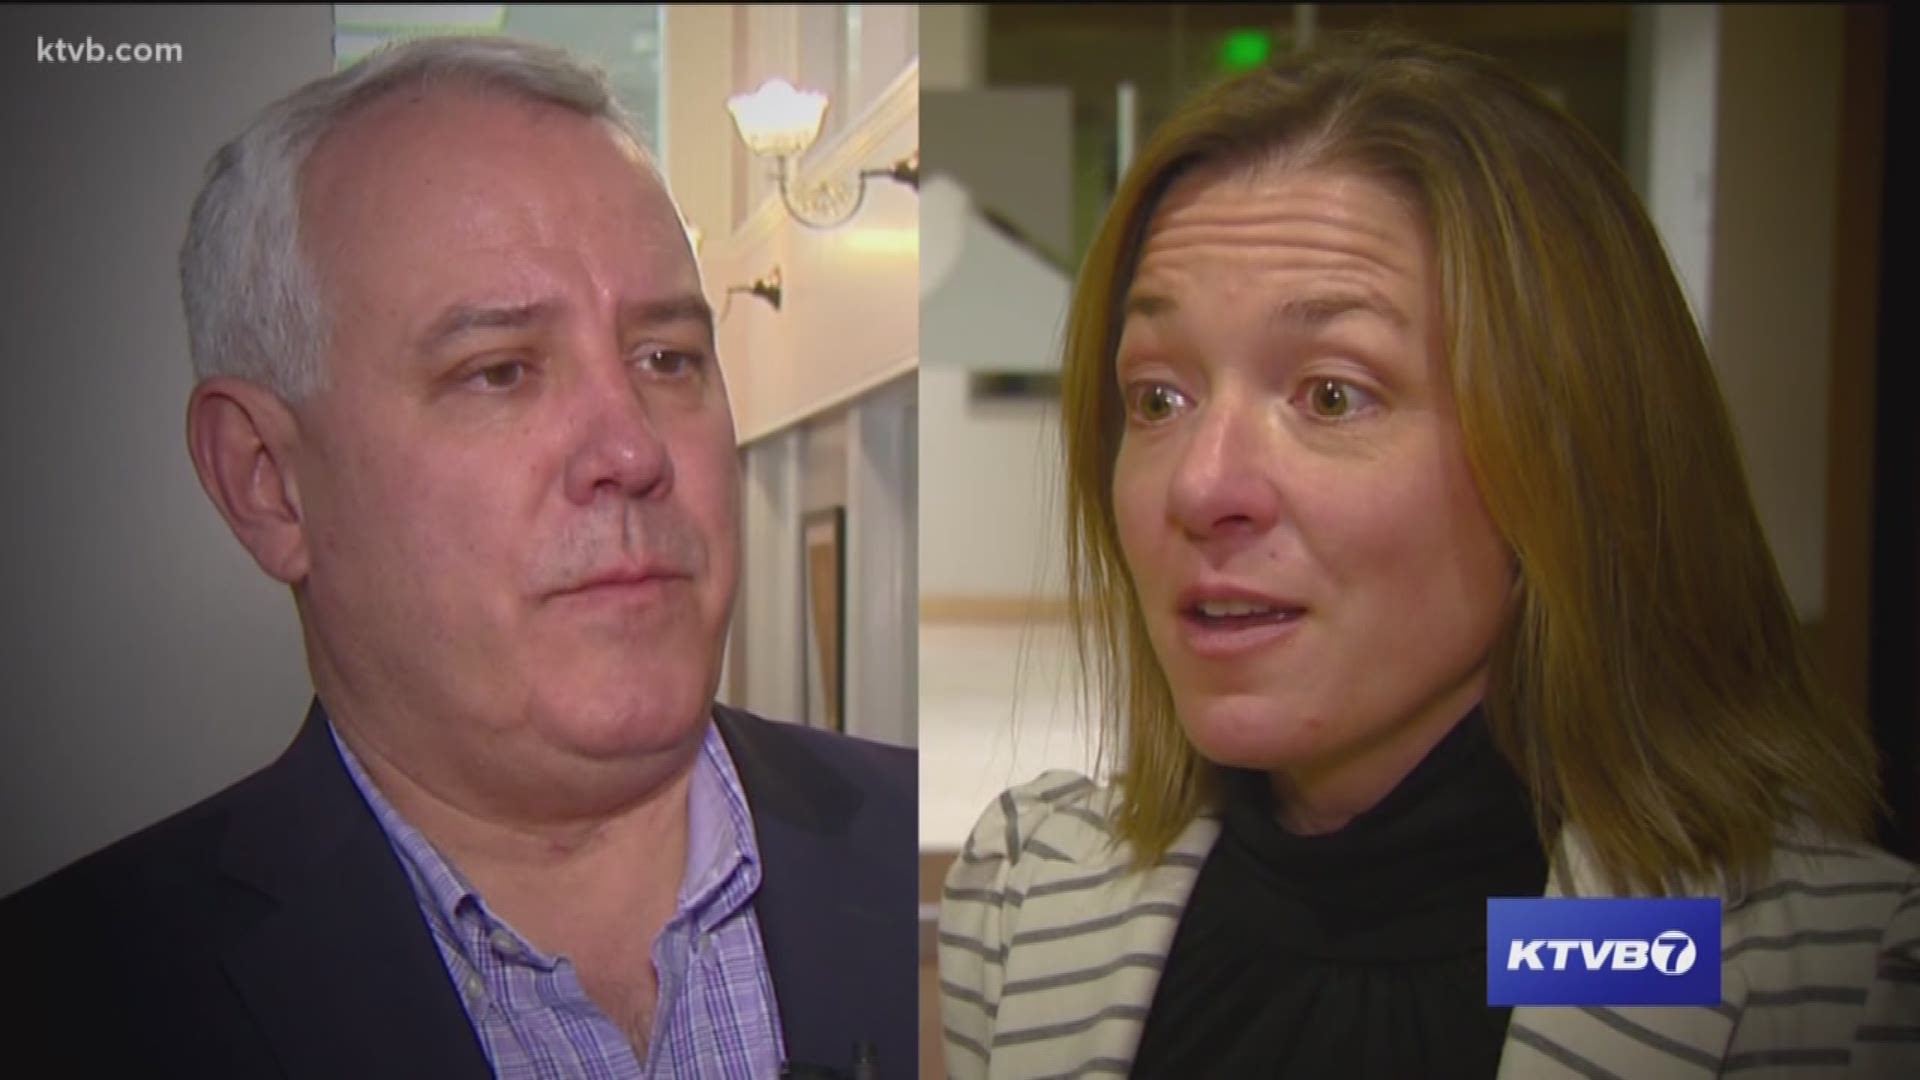 In this special edition of Viewpoint, Mark Johnson sat down with the Boise mayoral candidates one last time before voters head to the polls on Tuesday.